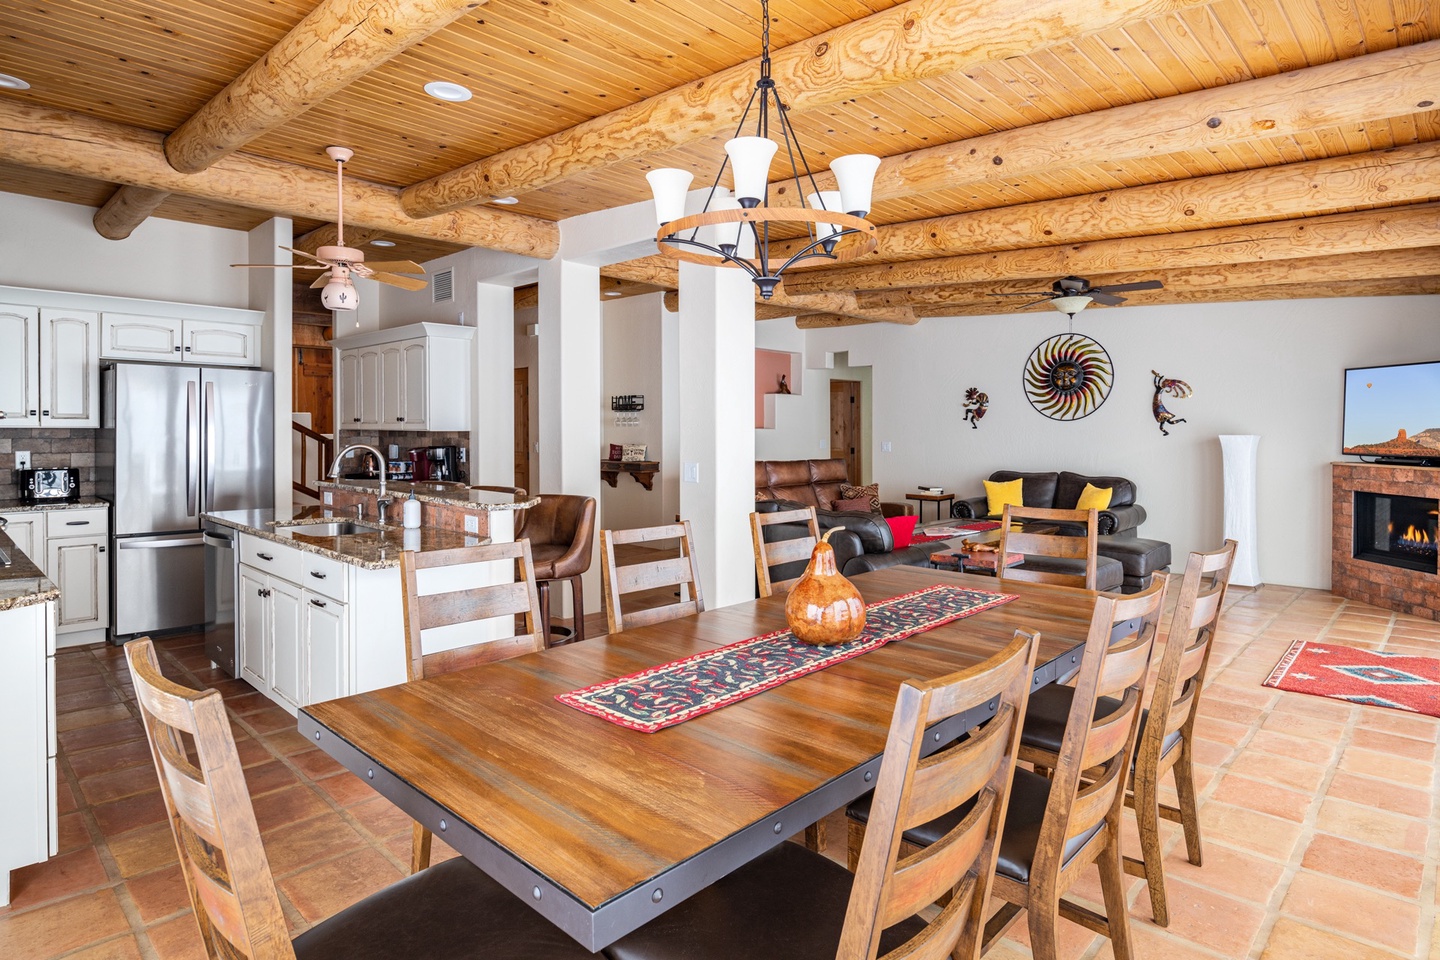 Great space for enjoying a home cooked meal